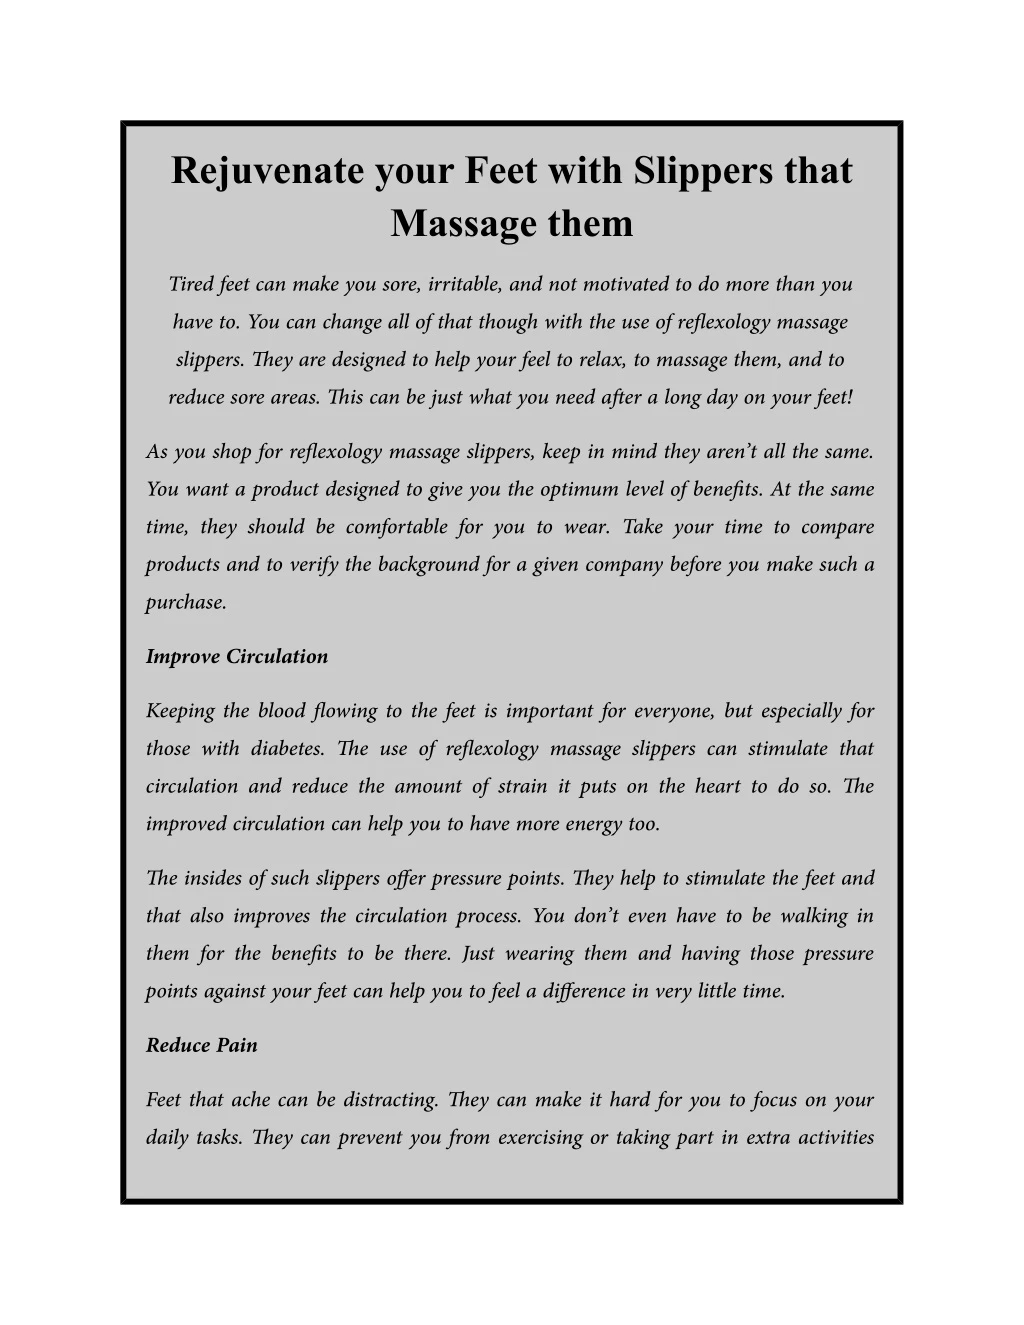 rejuvenate your feet with slippers that massage